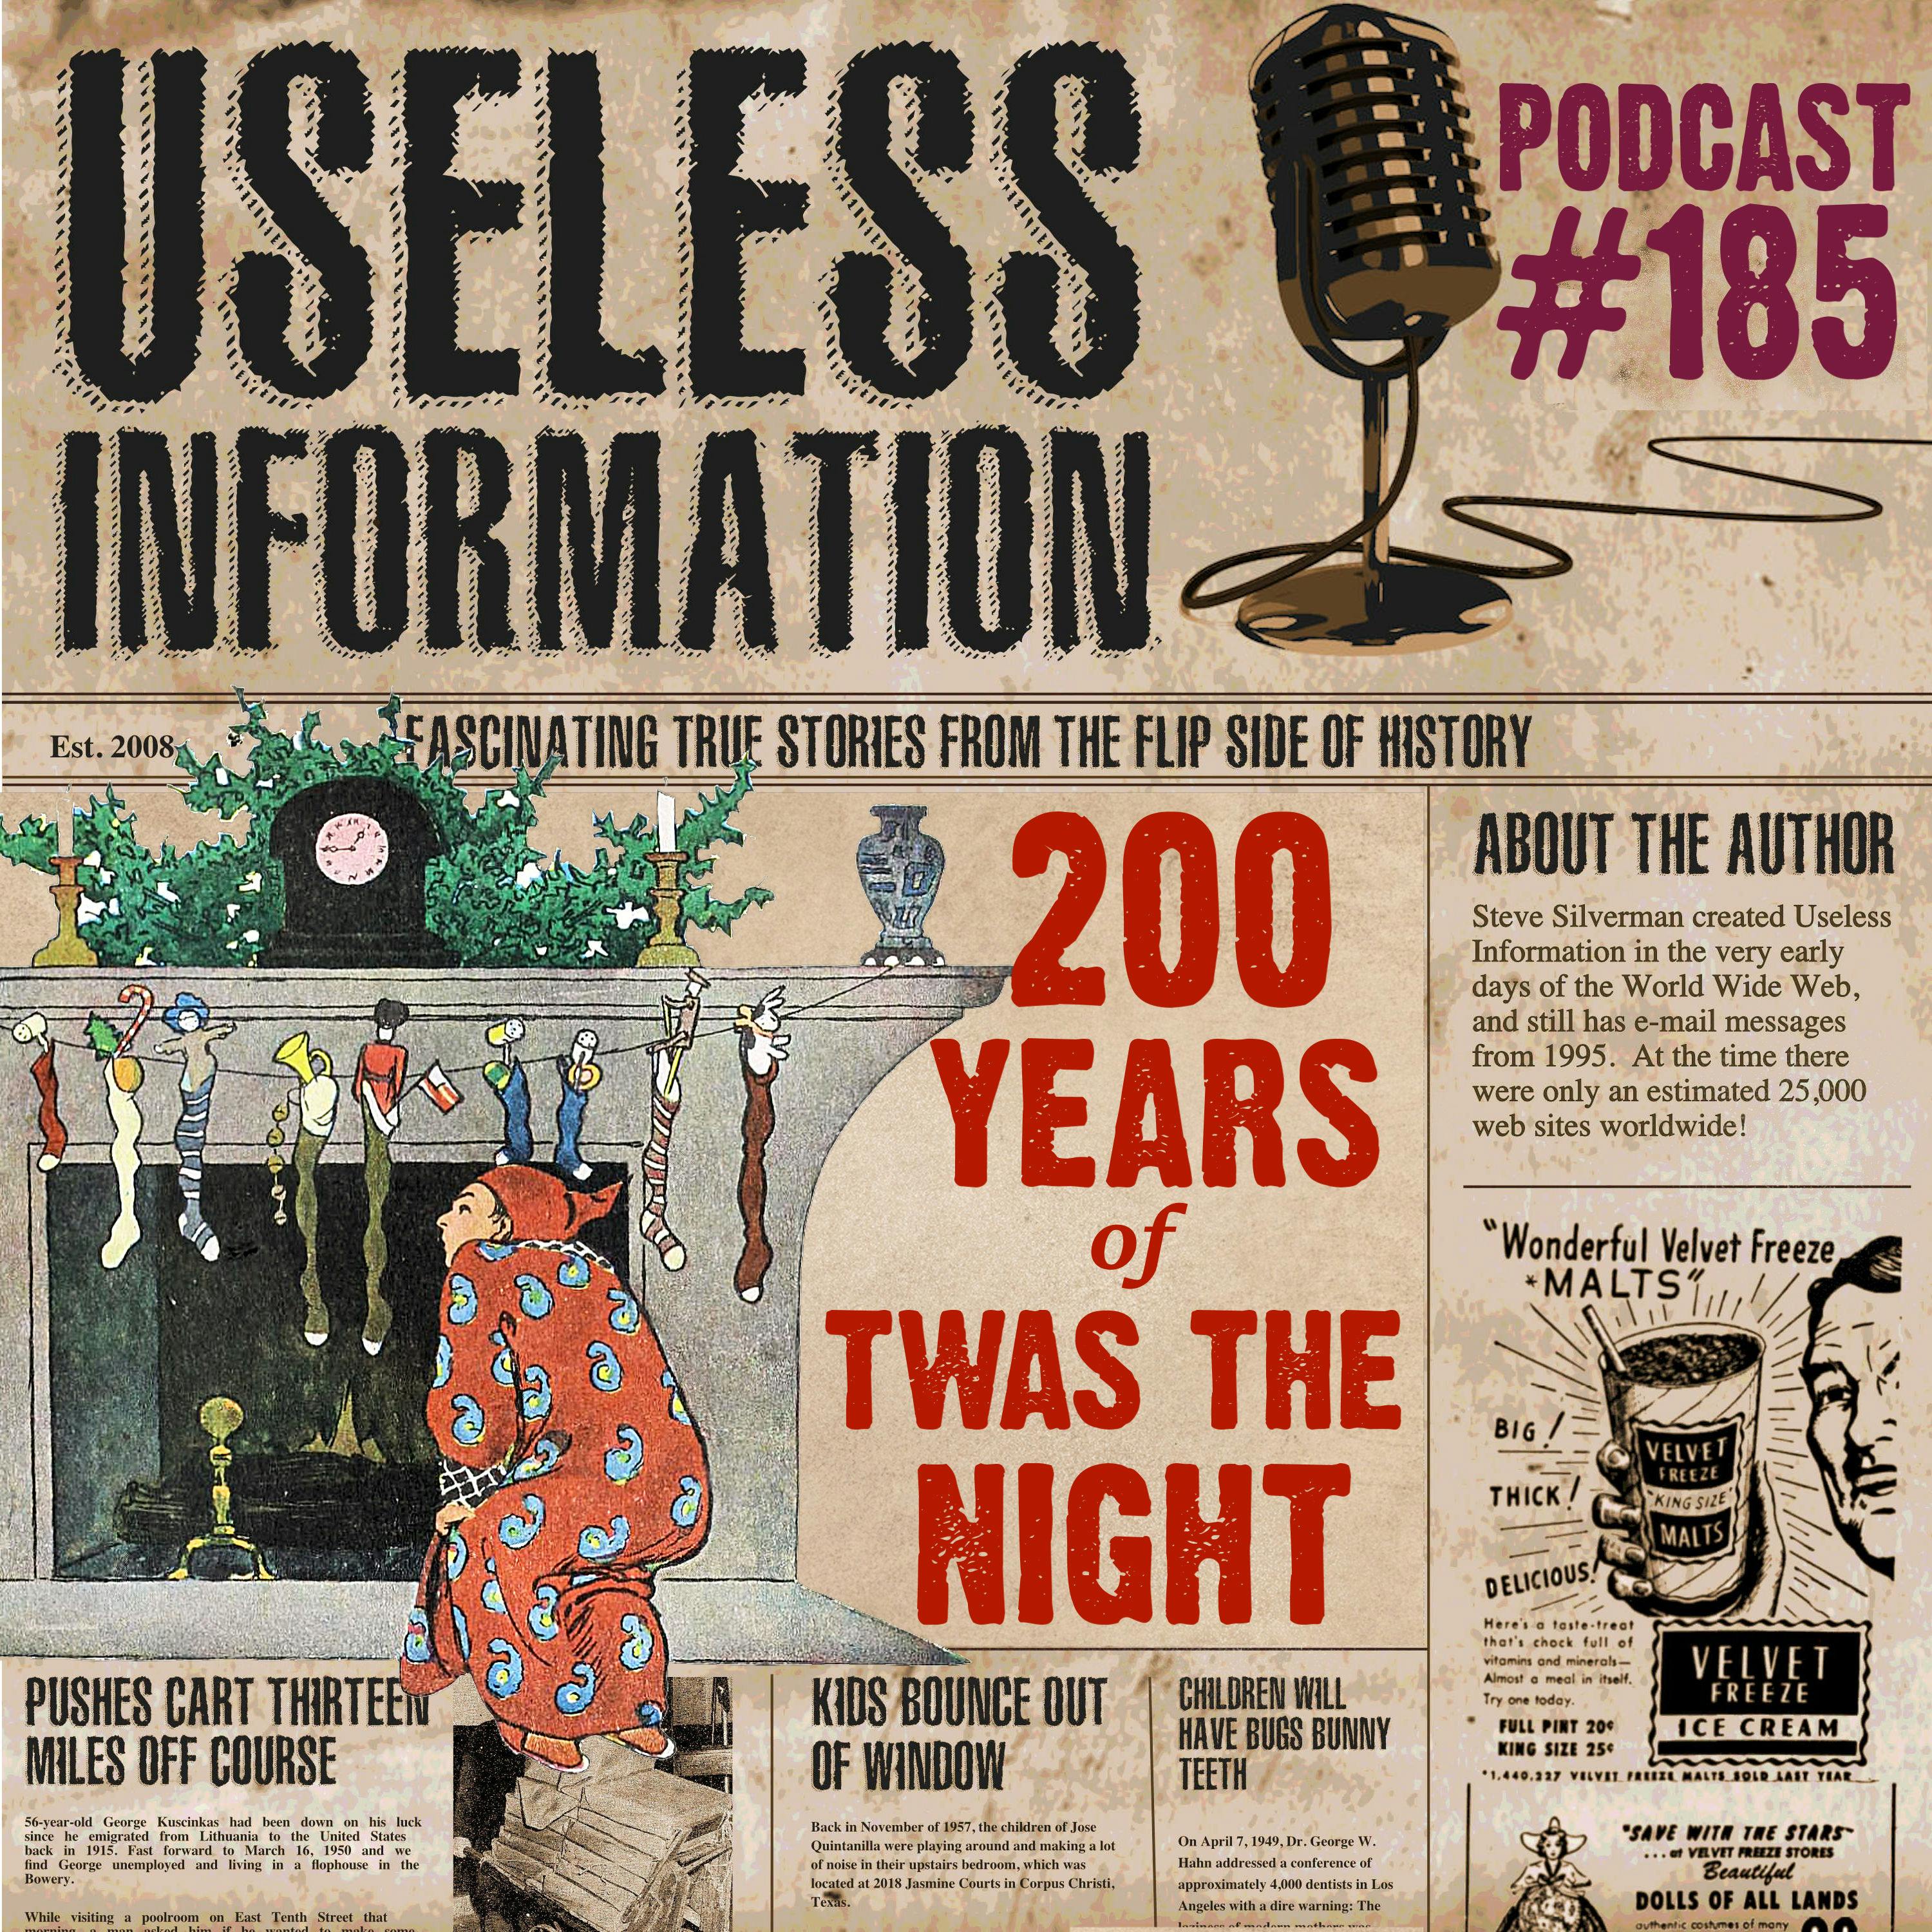 200 Years of Twas the Night - UI Podcast #185